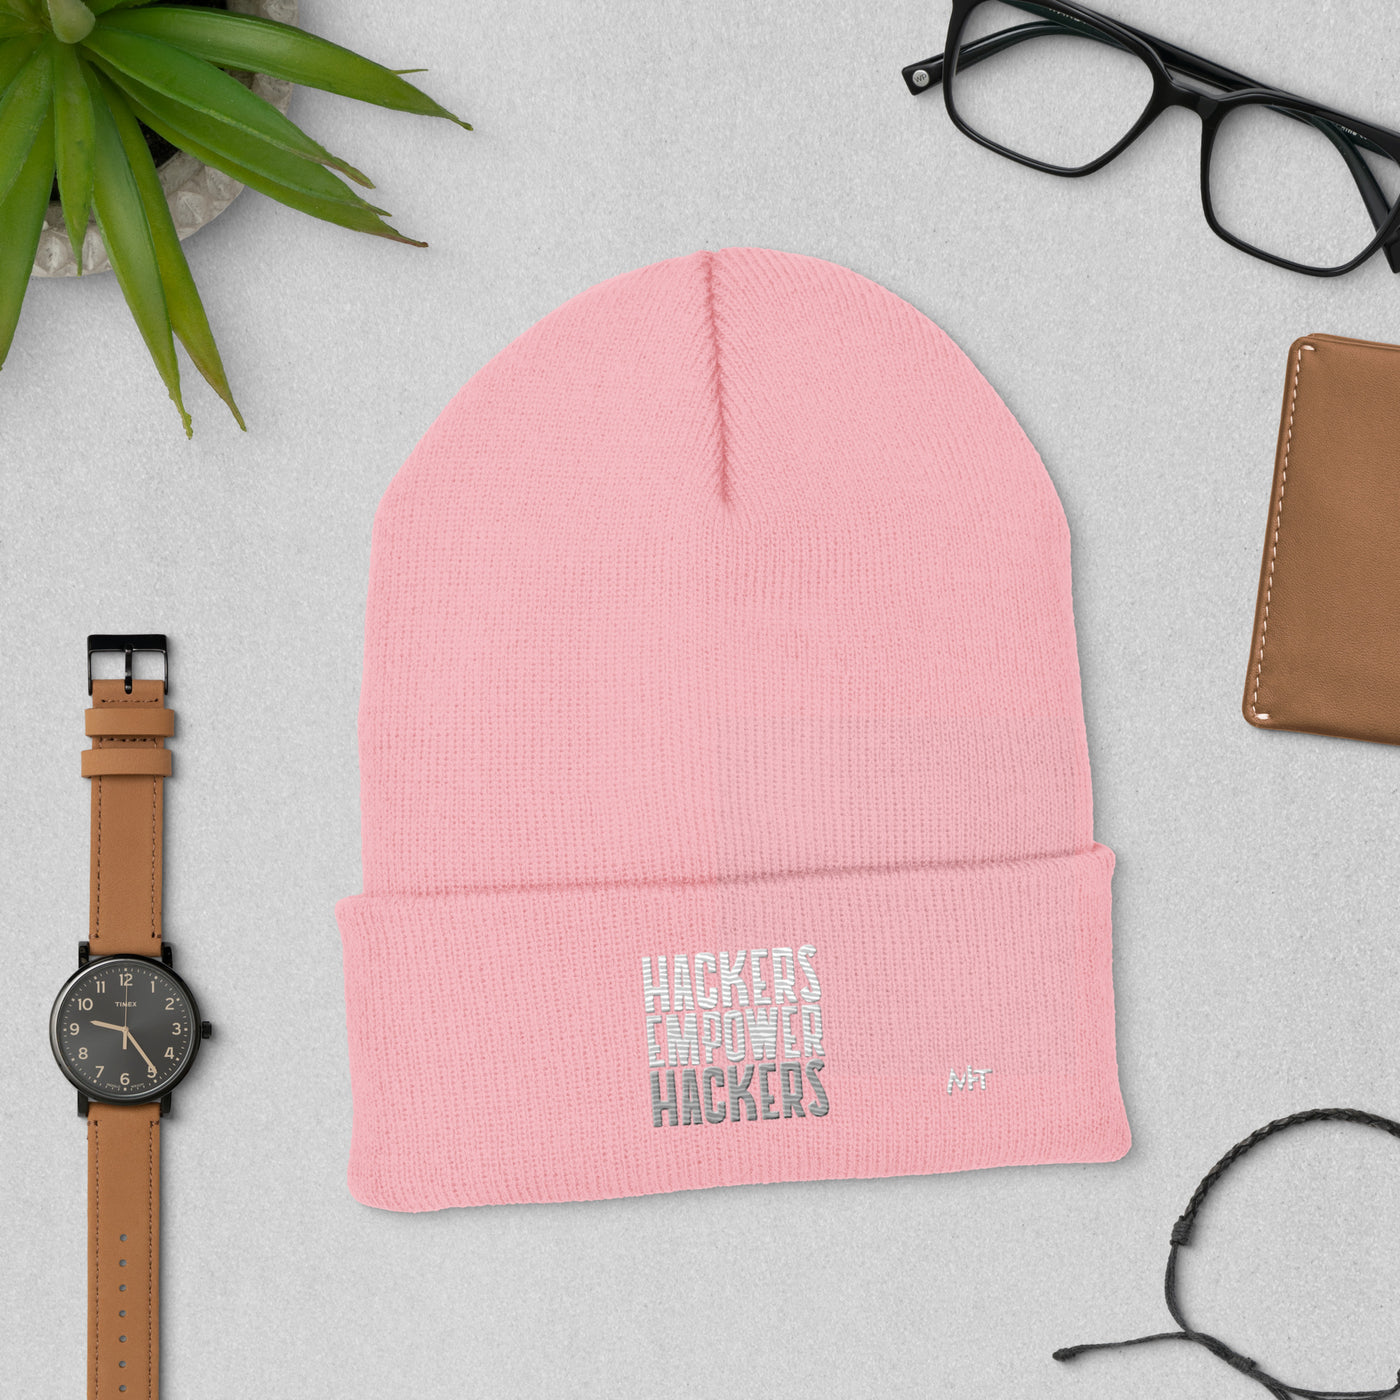 Hackers Empower Hackers - Cuffed Beanie